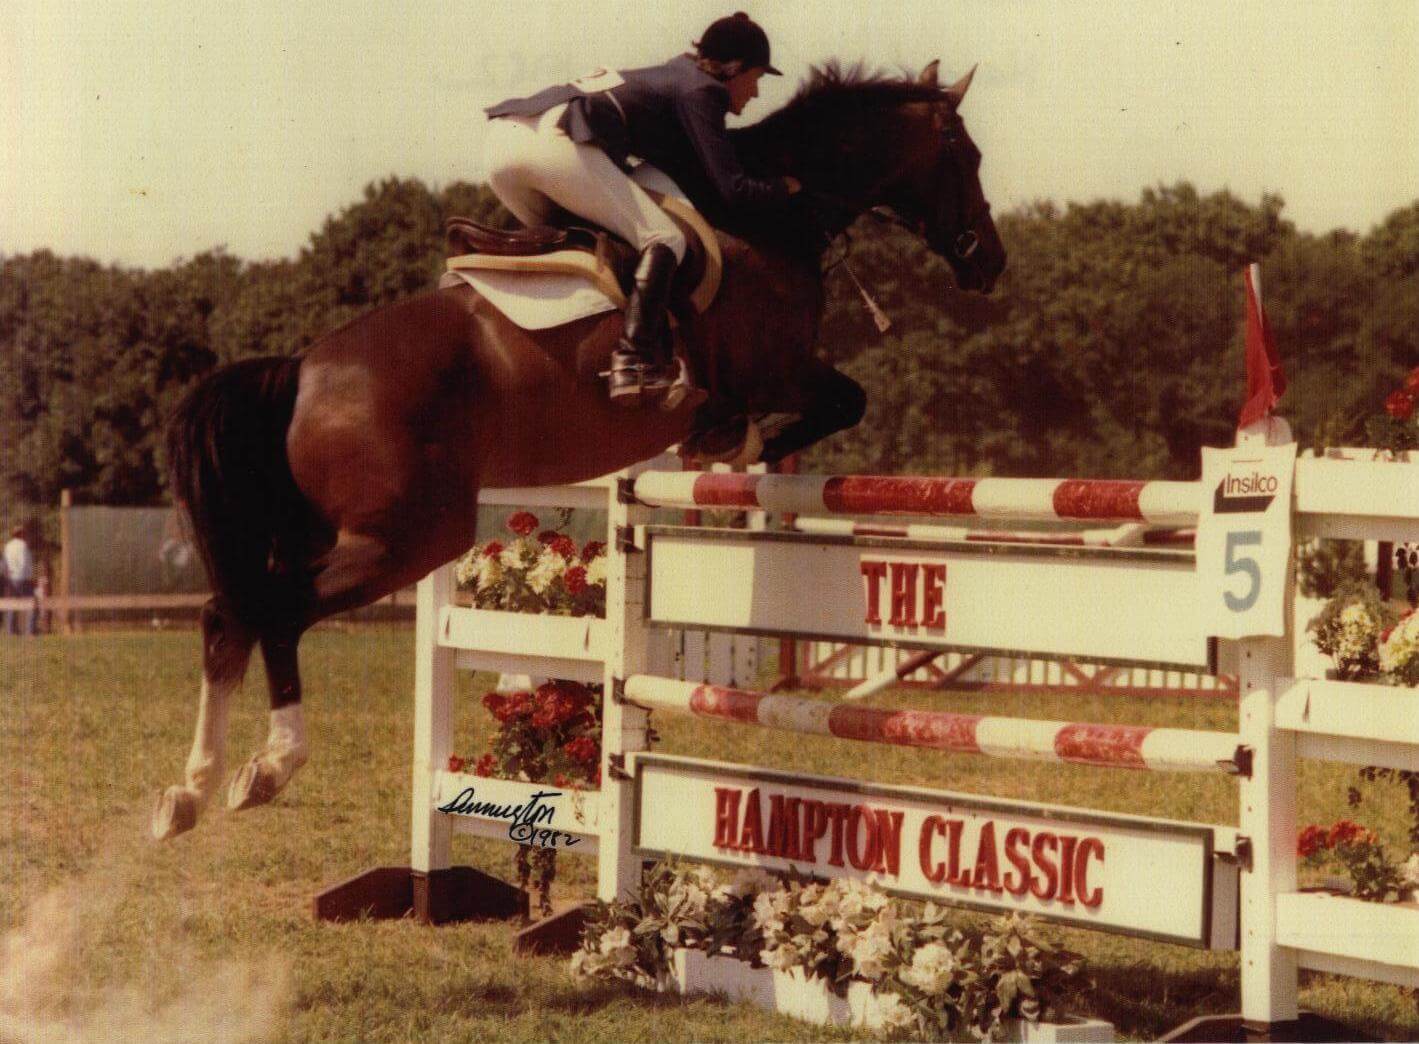 Carlene Blunt, a longtime donor to Penn Vet who established the Csaba Vedlik Equine Scholarship in 1999, was named Horsewoman of the Year in 1972. (Image: Courtesy of Carlene Blunt)